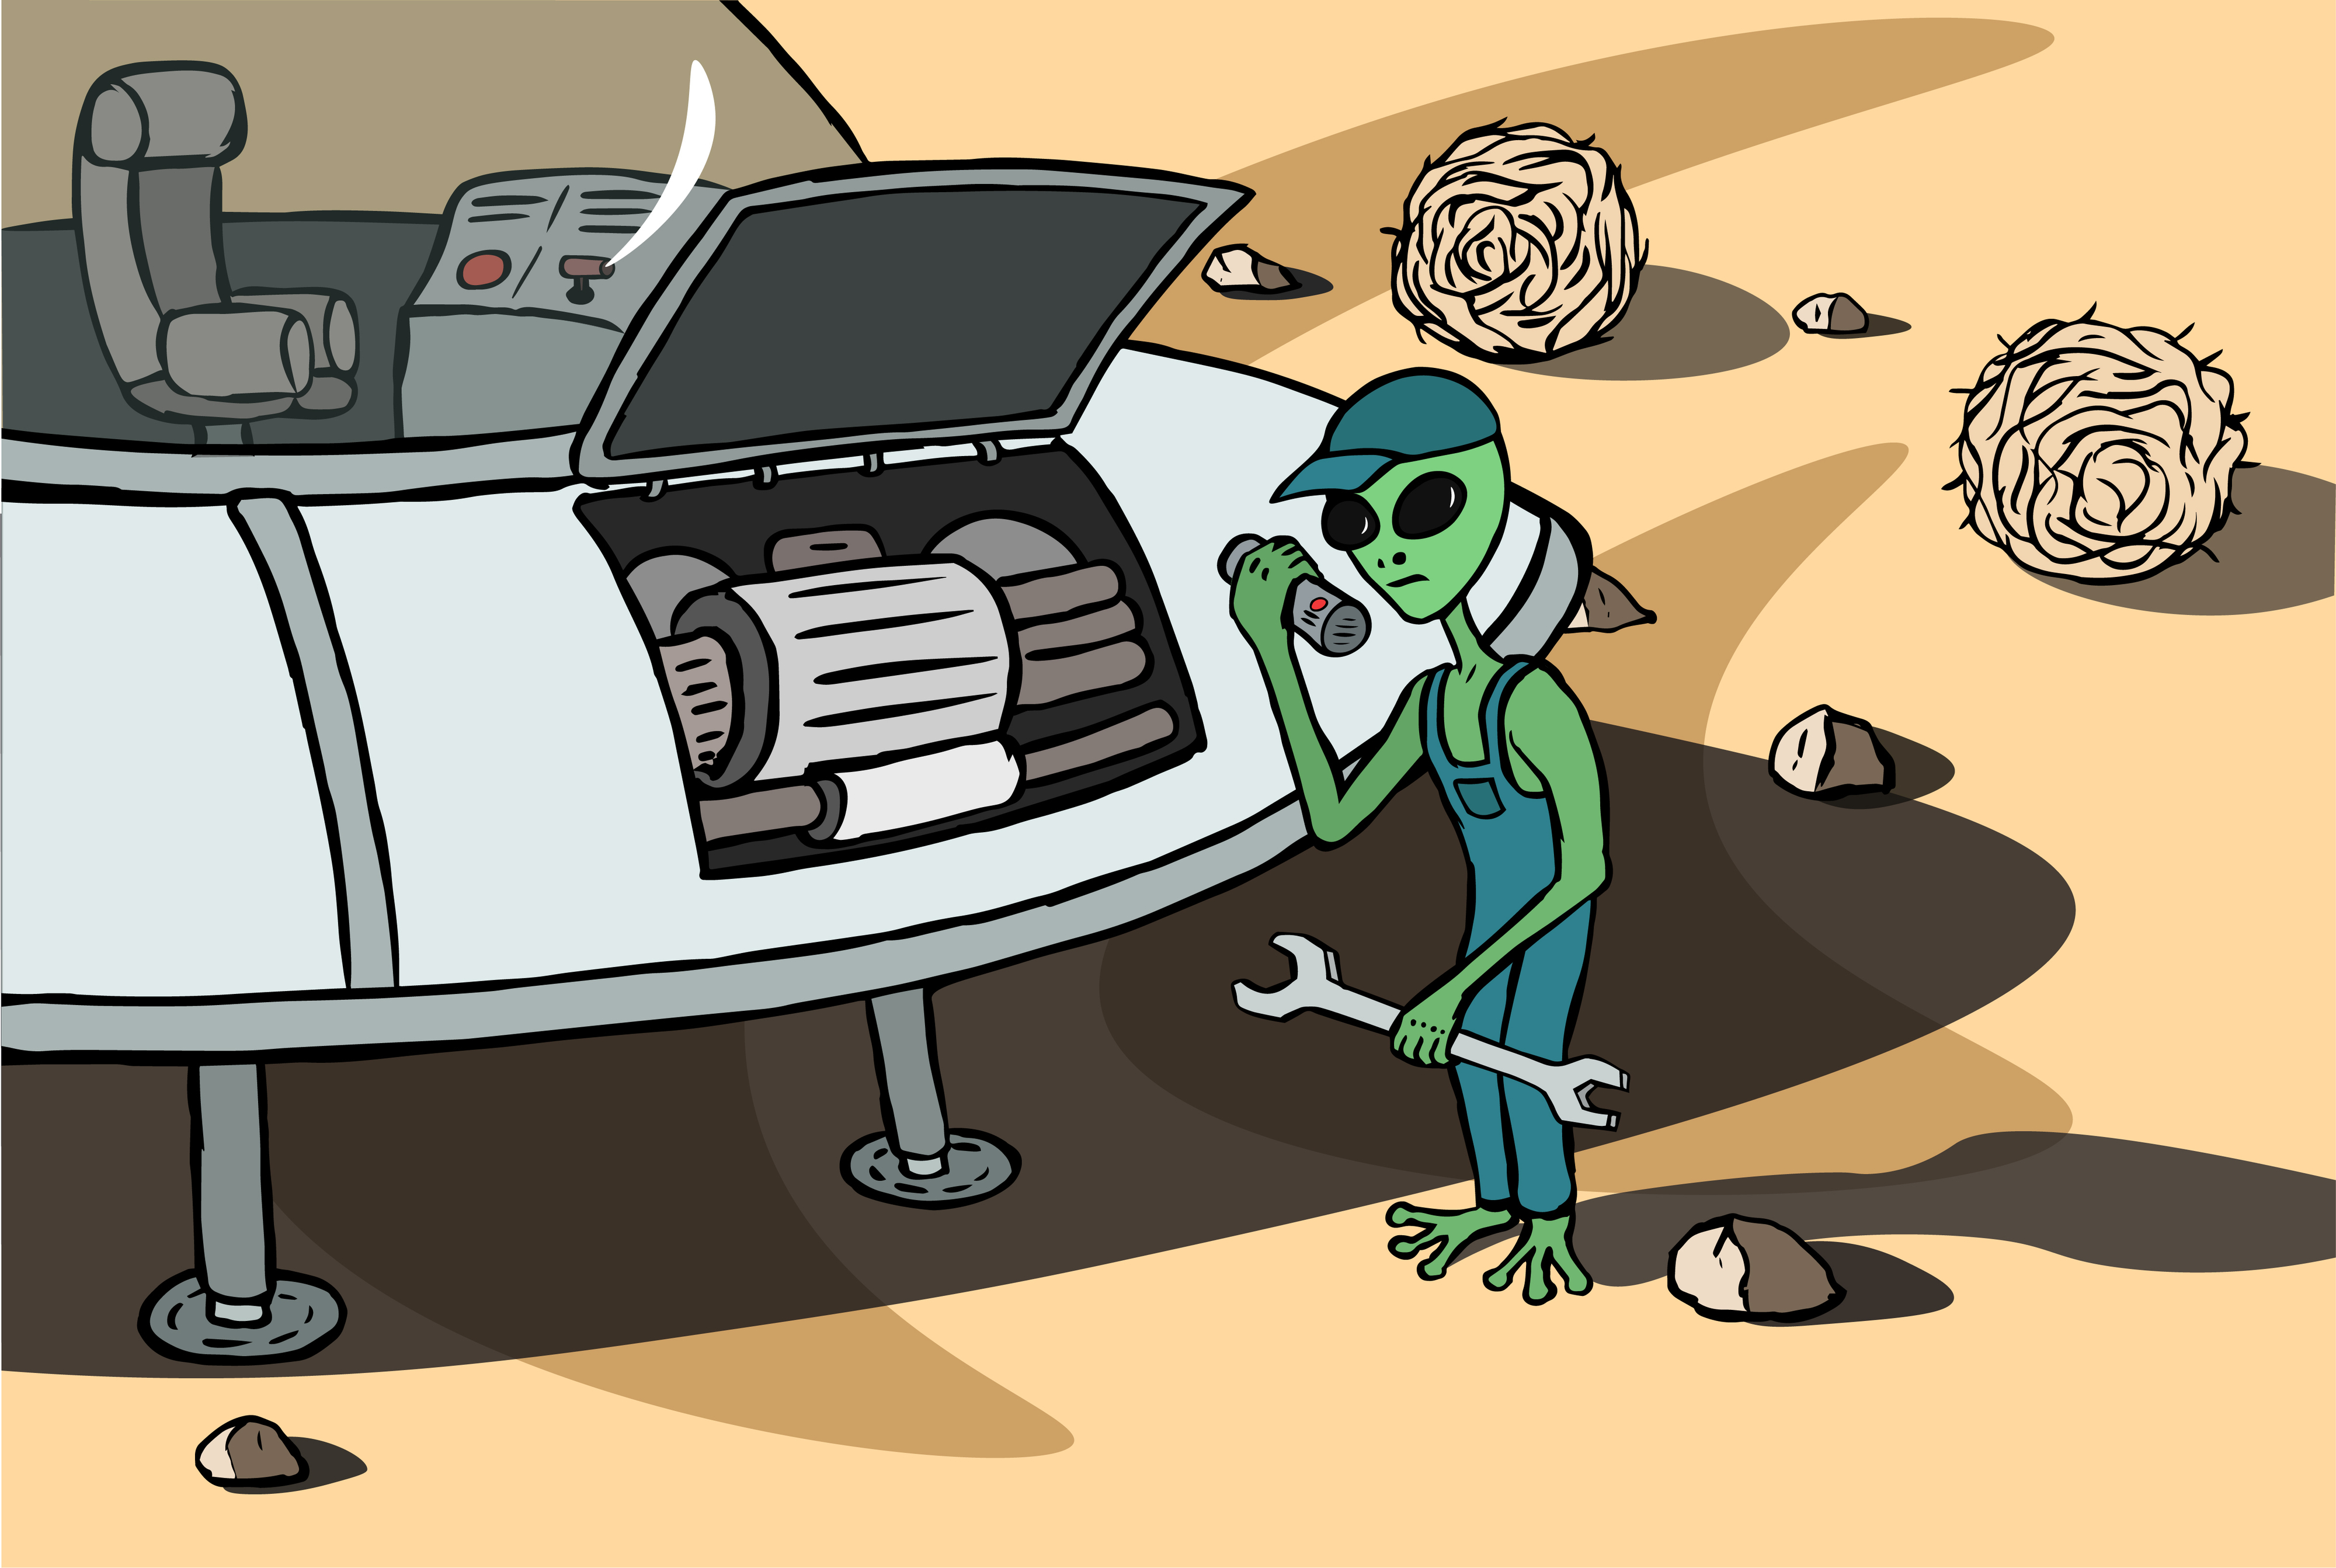 Cartoon of an alien holding a wrench to repair a spaceship